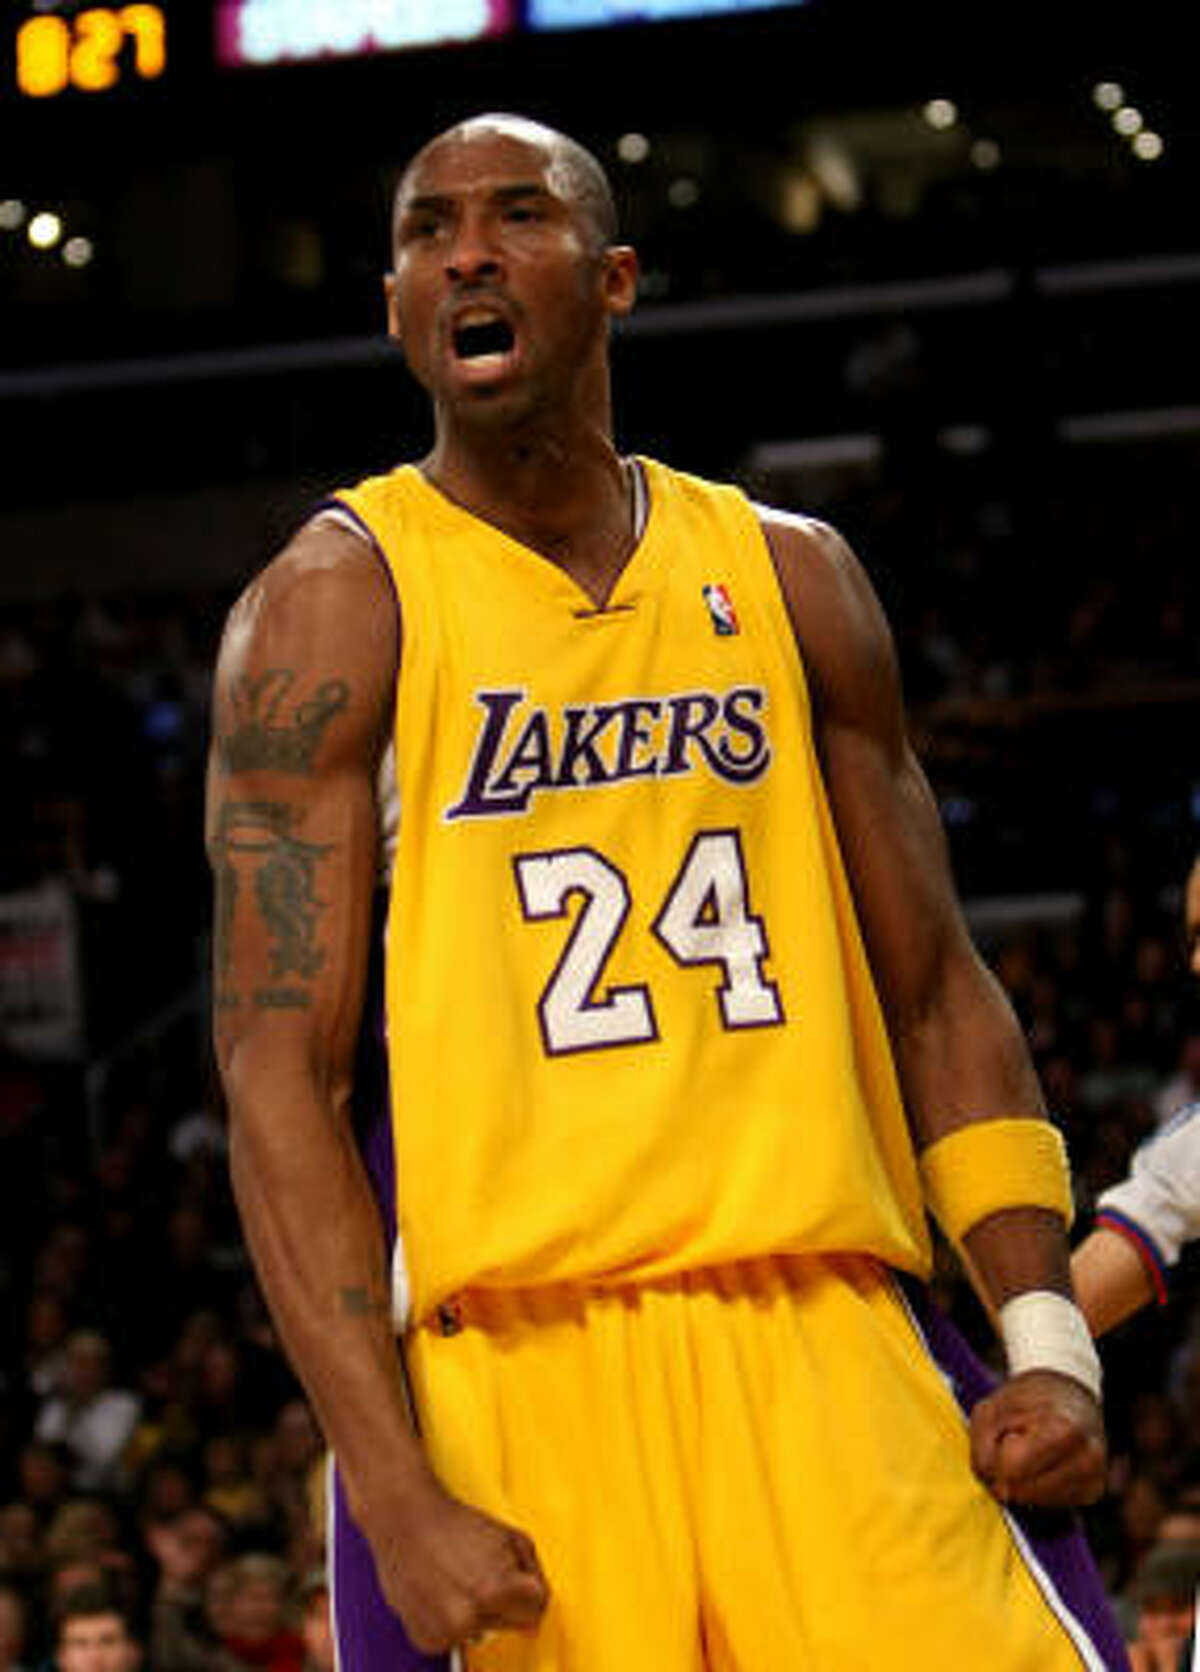 1 - LOS ANGELES LAKERS - (Last wk: 2) - 42-10 - Most teams would have been so happy with the win at Boston to have turned around and bowed to the hostile crowd in Cleveland. But the Lakers were still hungry and even with Kobe Bryant ailing had enough to devour the Cavs' perfect home court record.